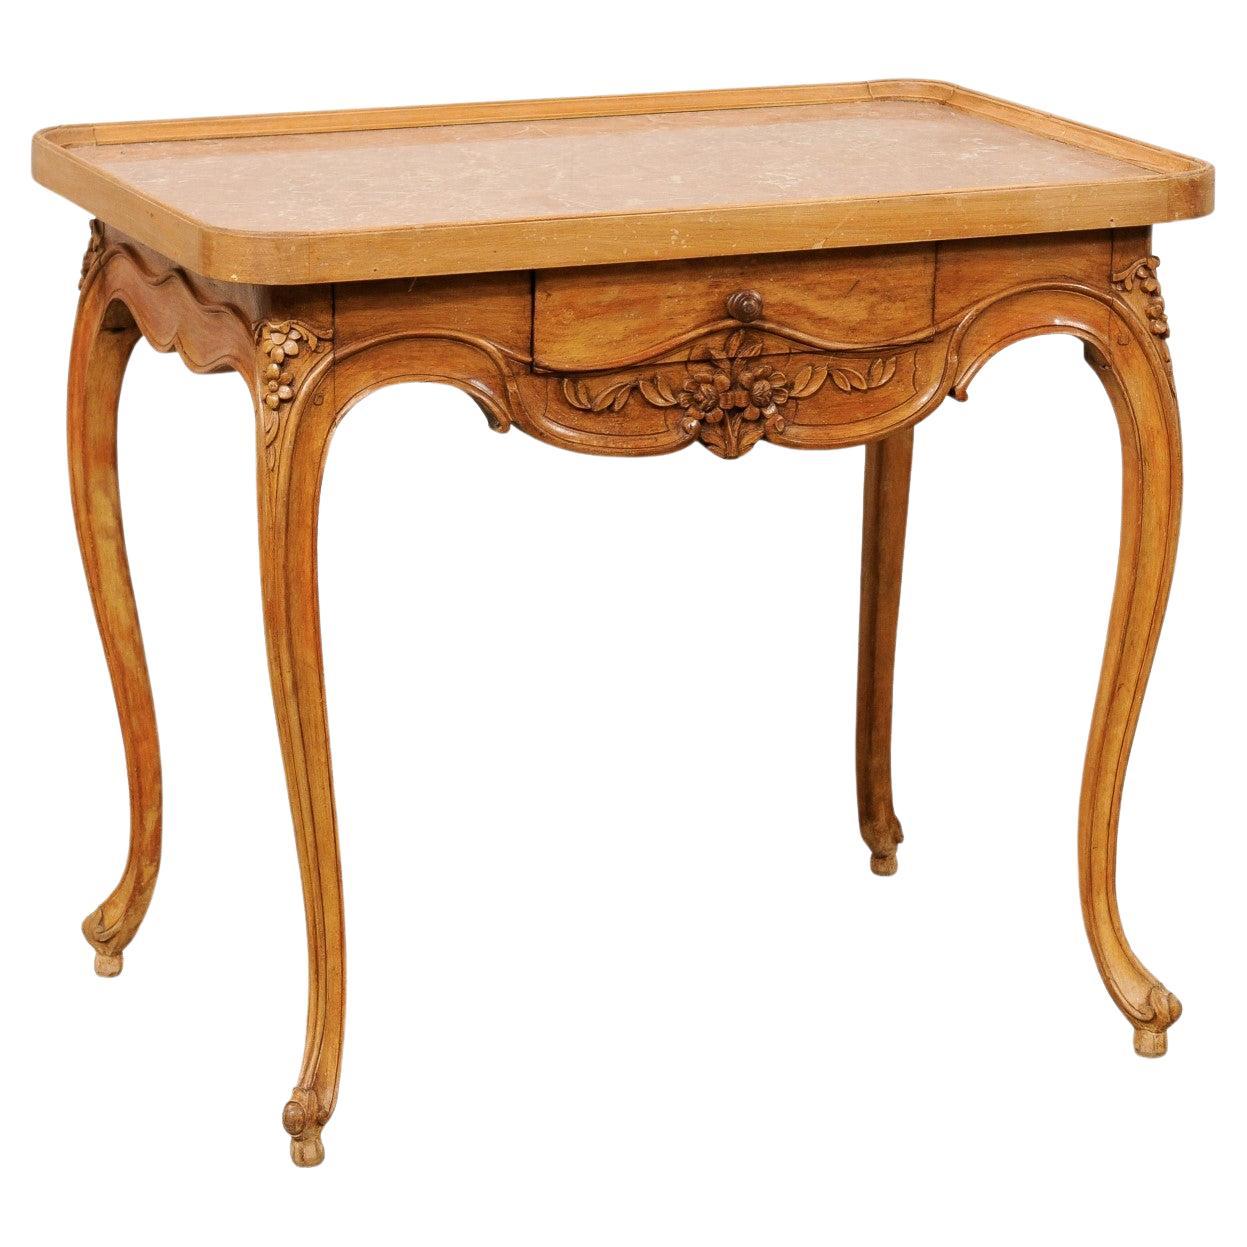 Late 18th Century French Marble-Top Carved-Wood Occasional Table with Drawer For Sale